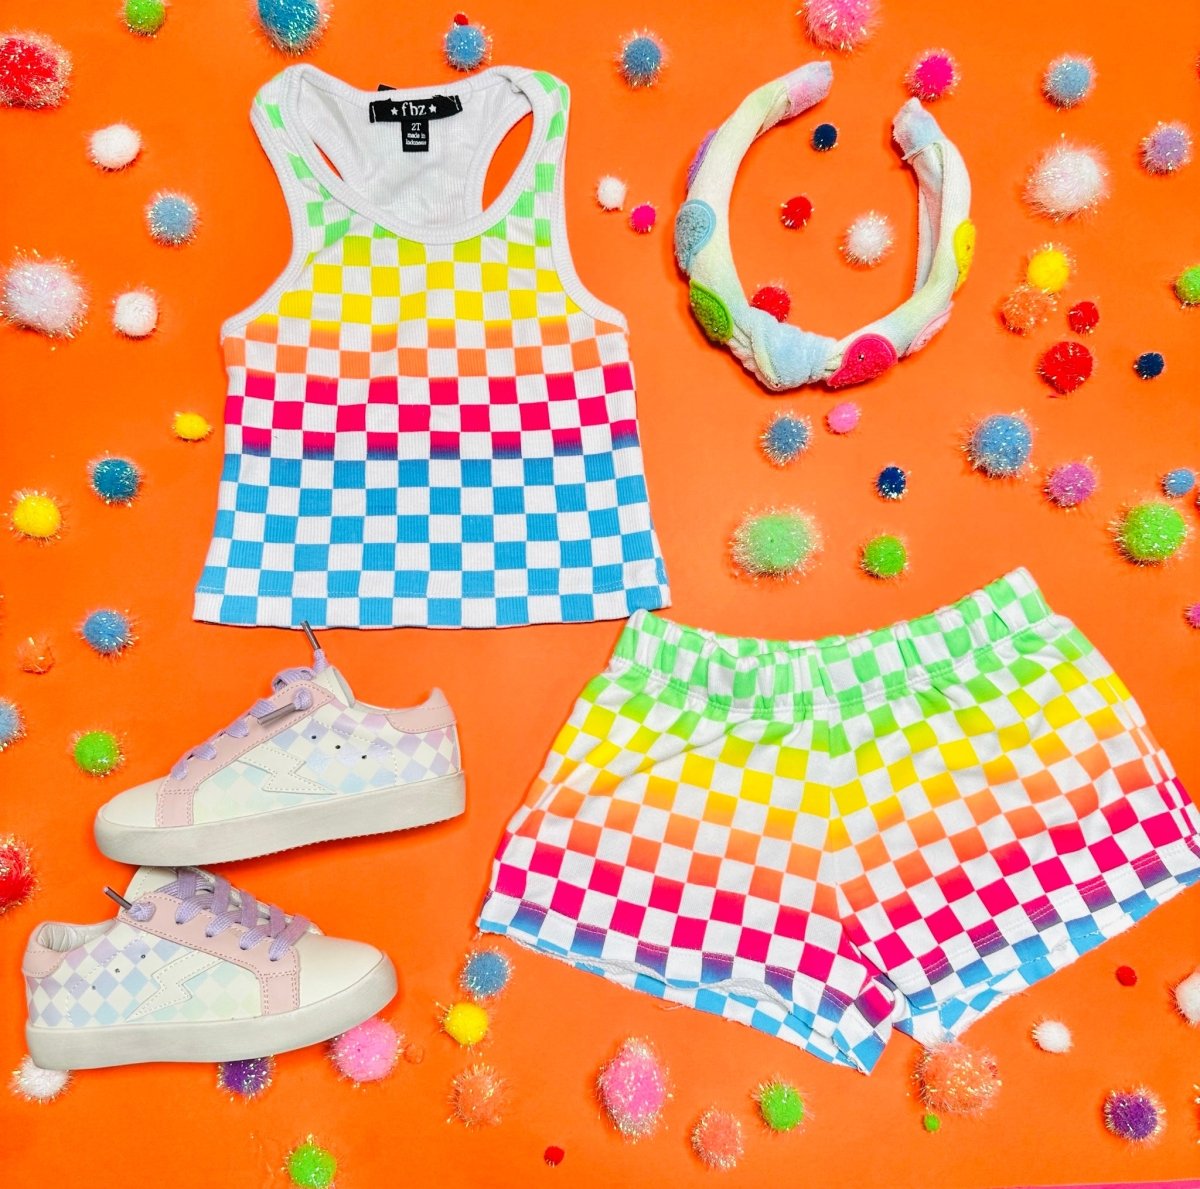 NEON CHECKERED TANK TOP - FLOWERS BY ZOE